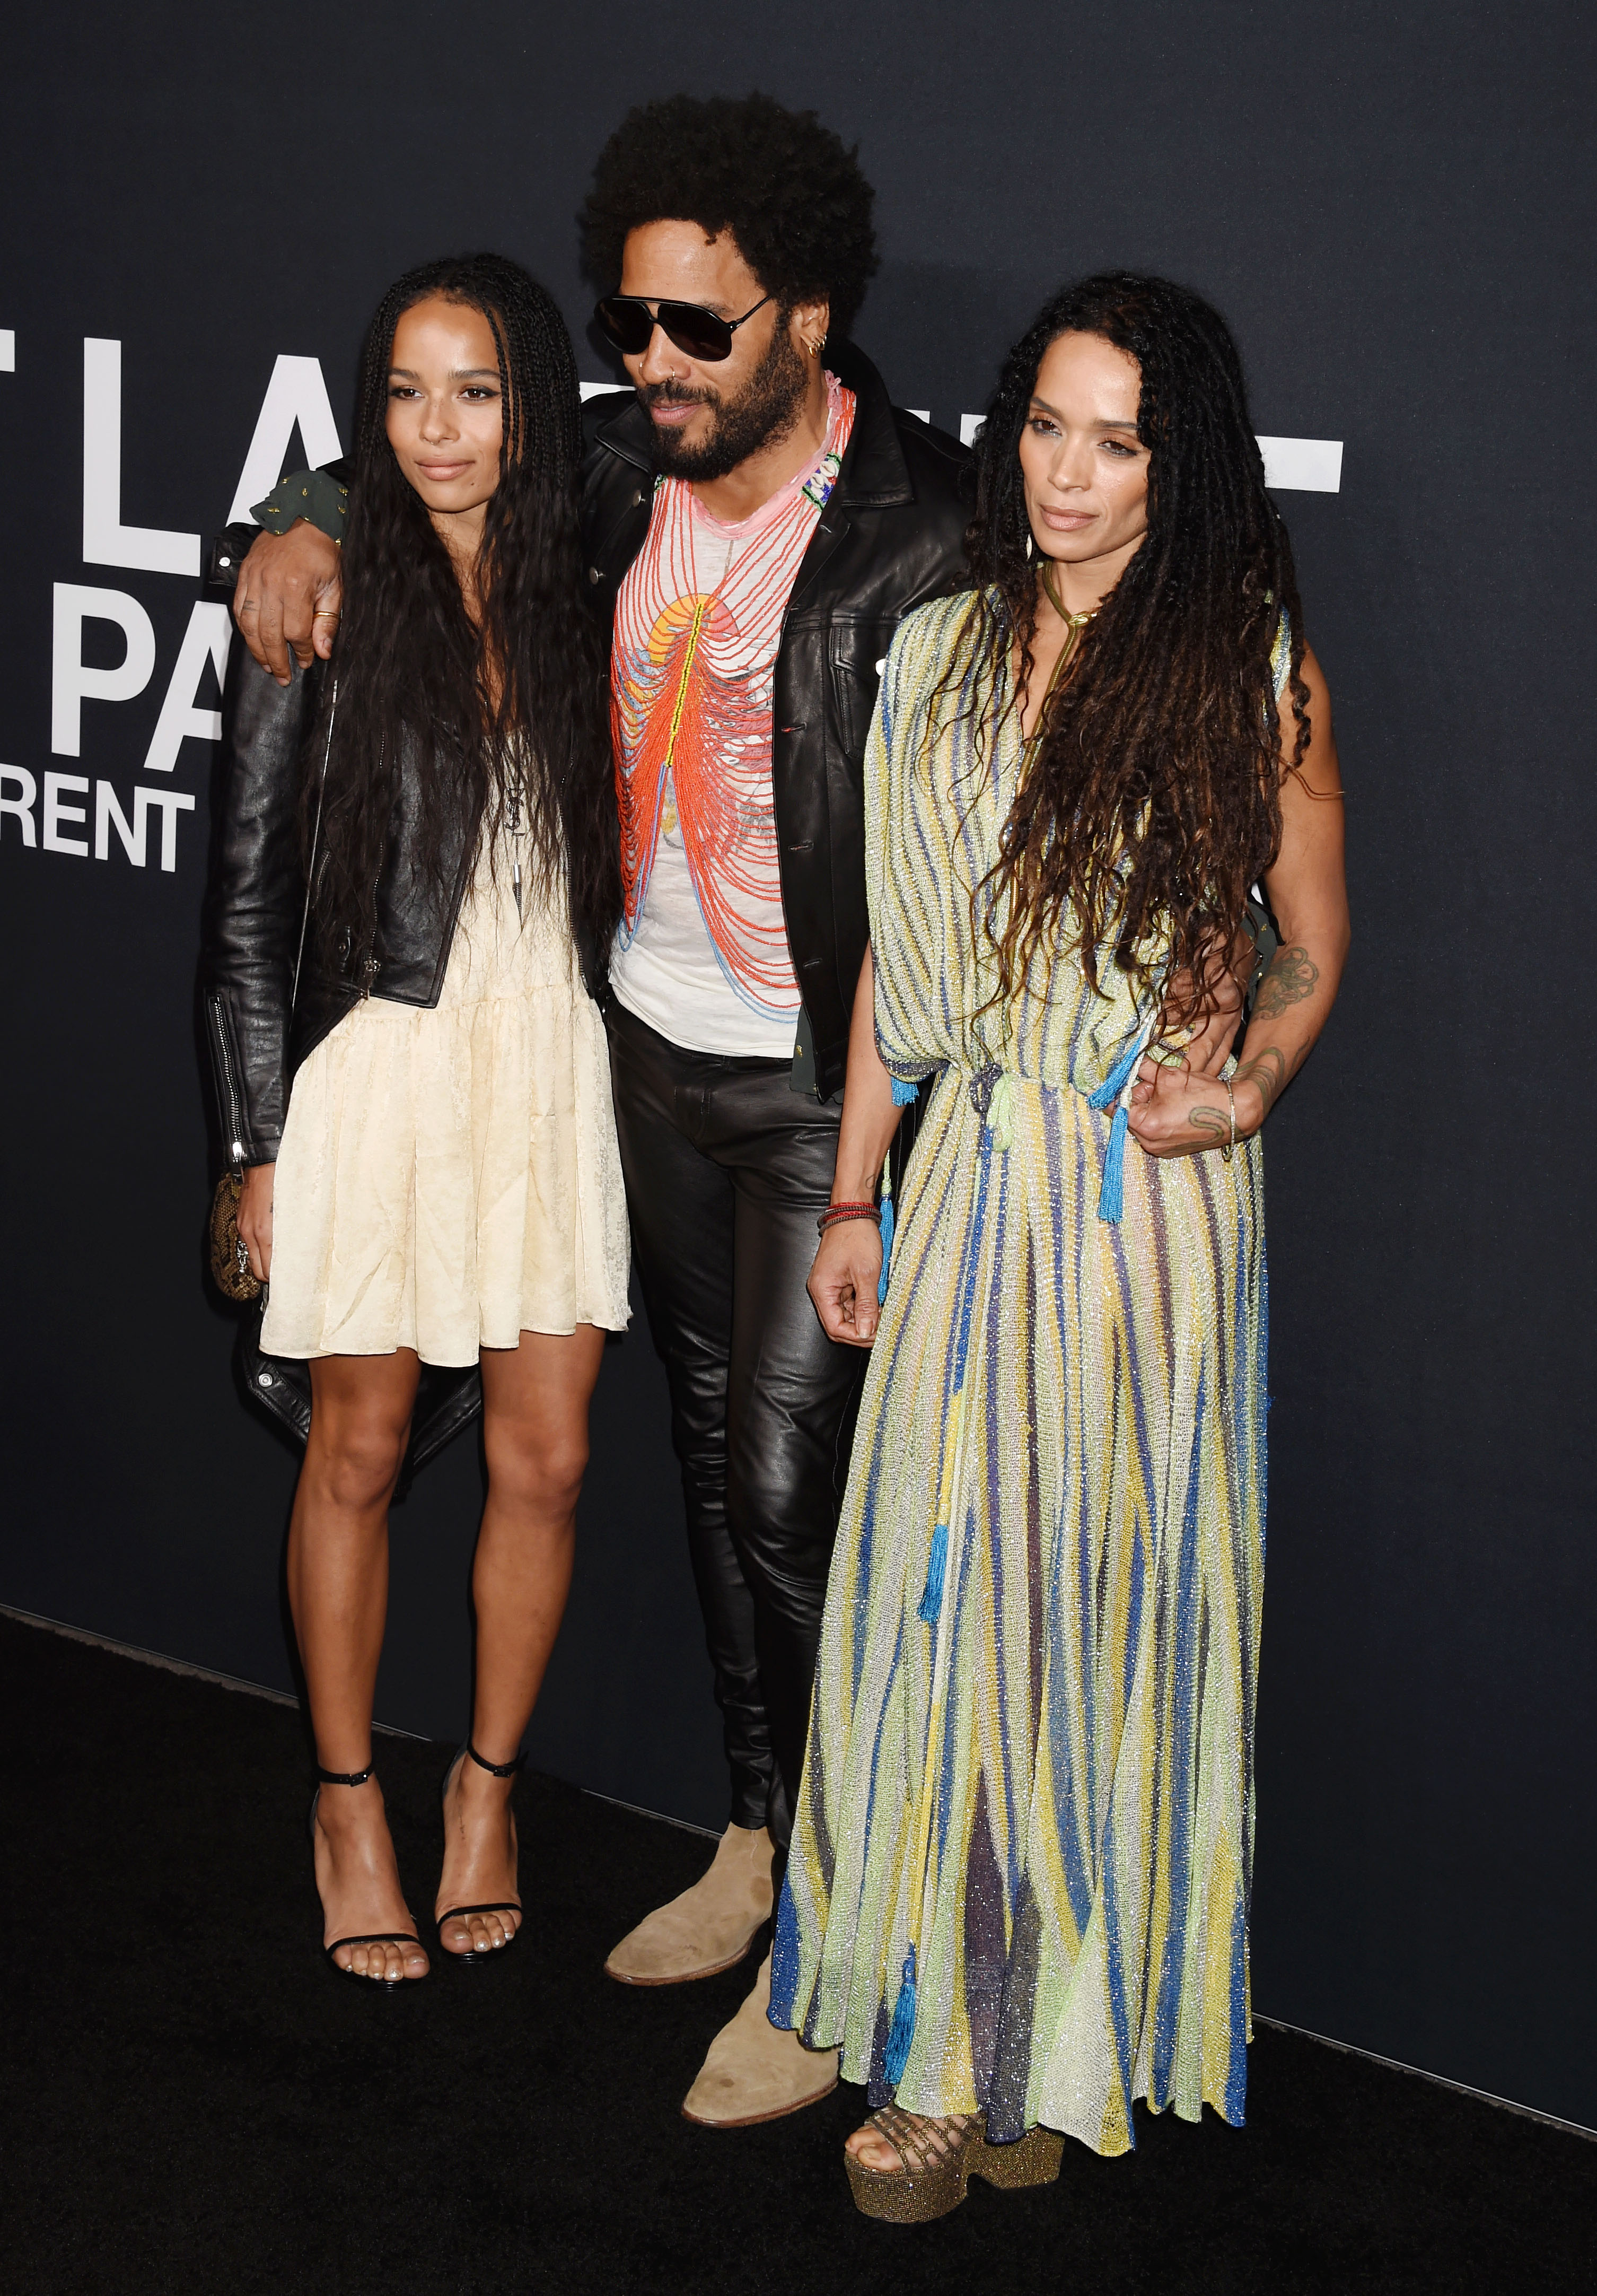 Zoe Kravitz, musician Lenny Kravitz and actress Lisa Bonet attend the Saint Laurent show at The Hollywood Palladium on February 10, 2016 in Los Angeles, California. | Source: Getty Images